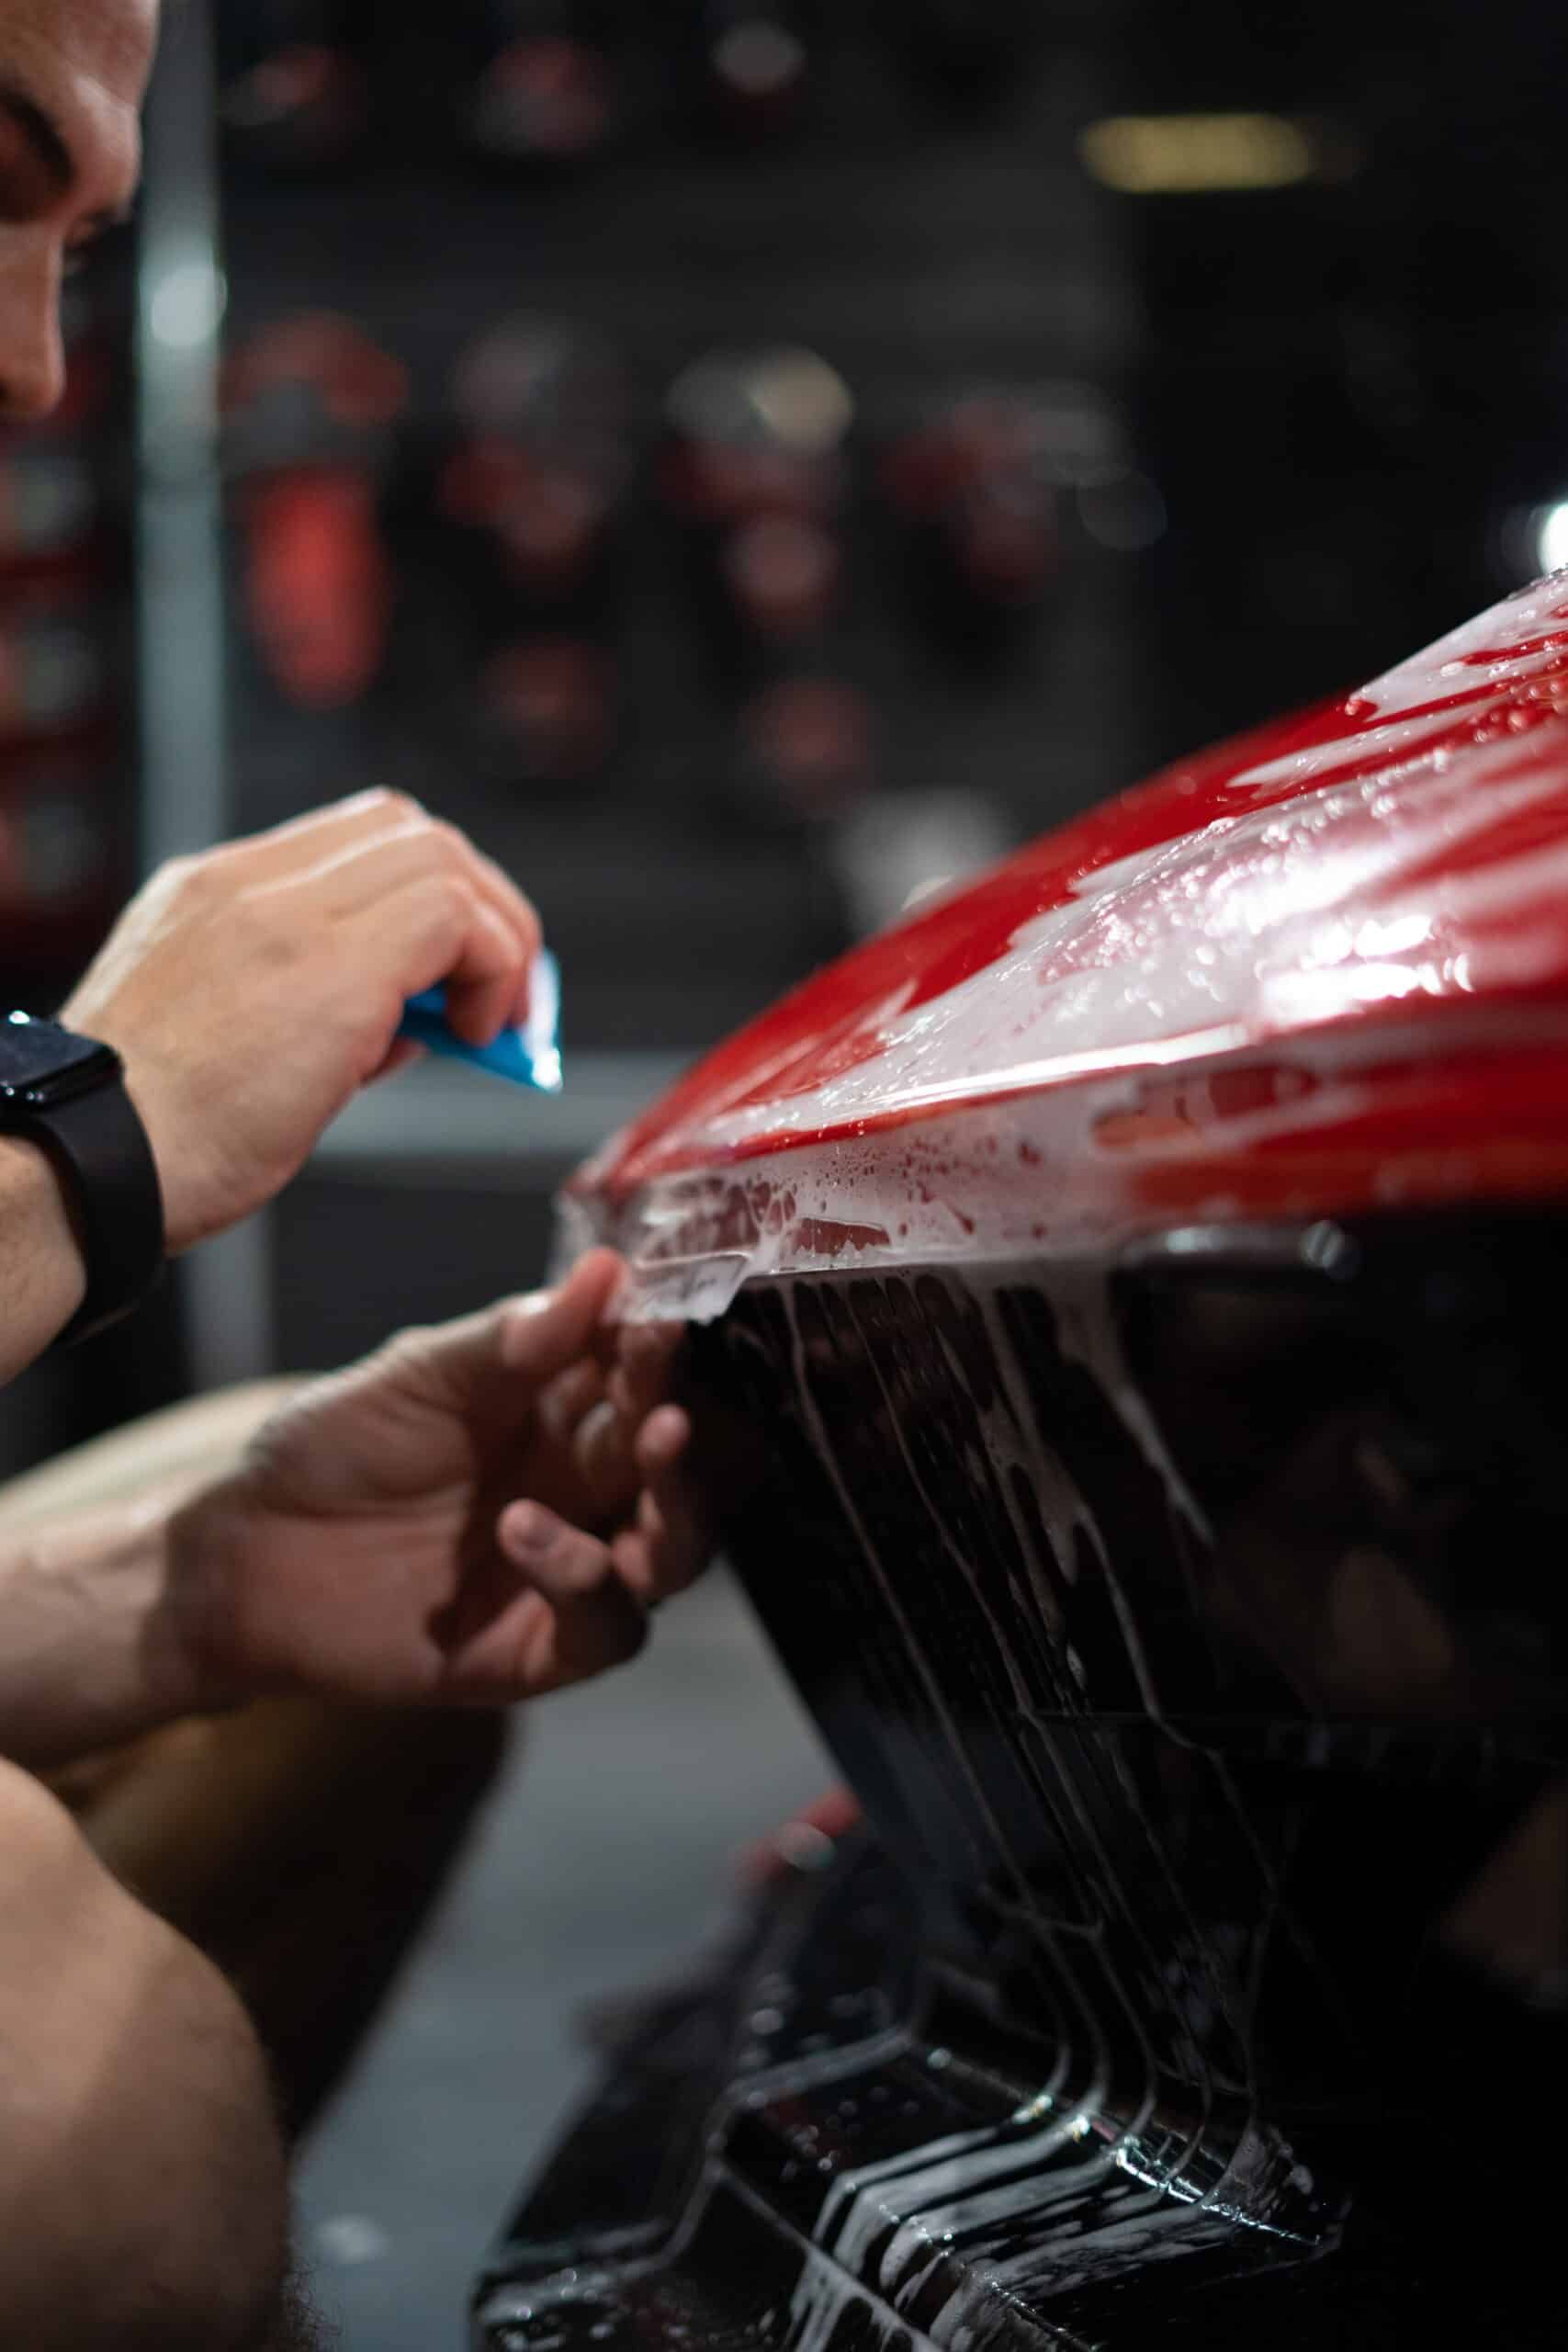 A man is wrapping a red car with a clear film.